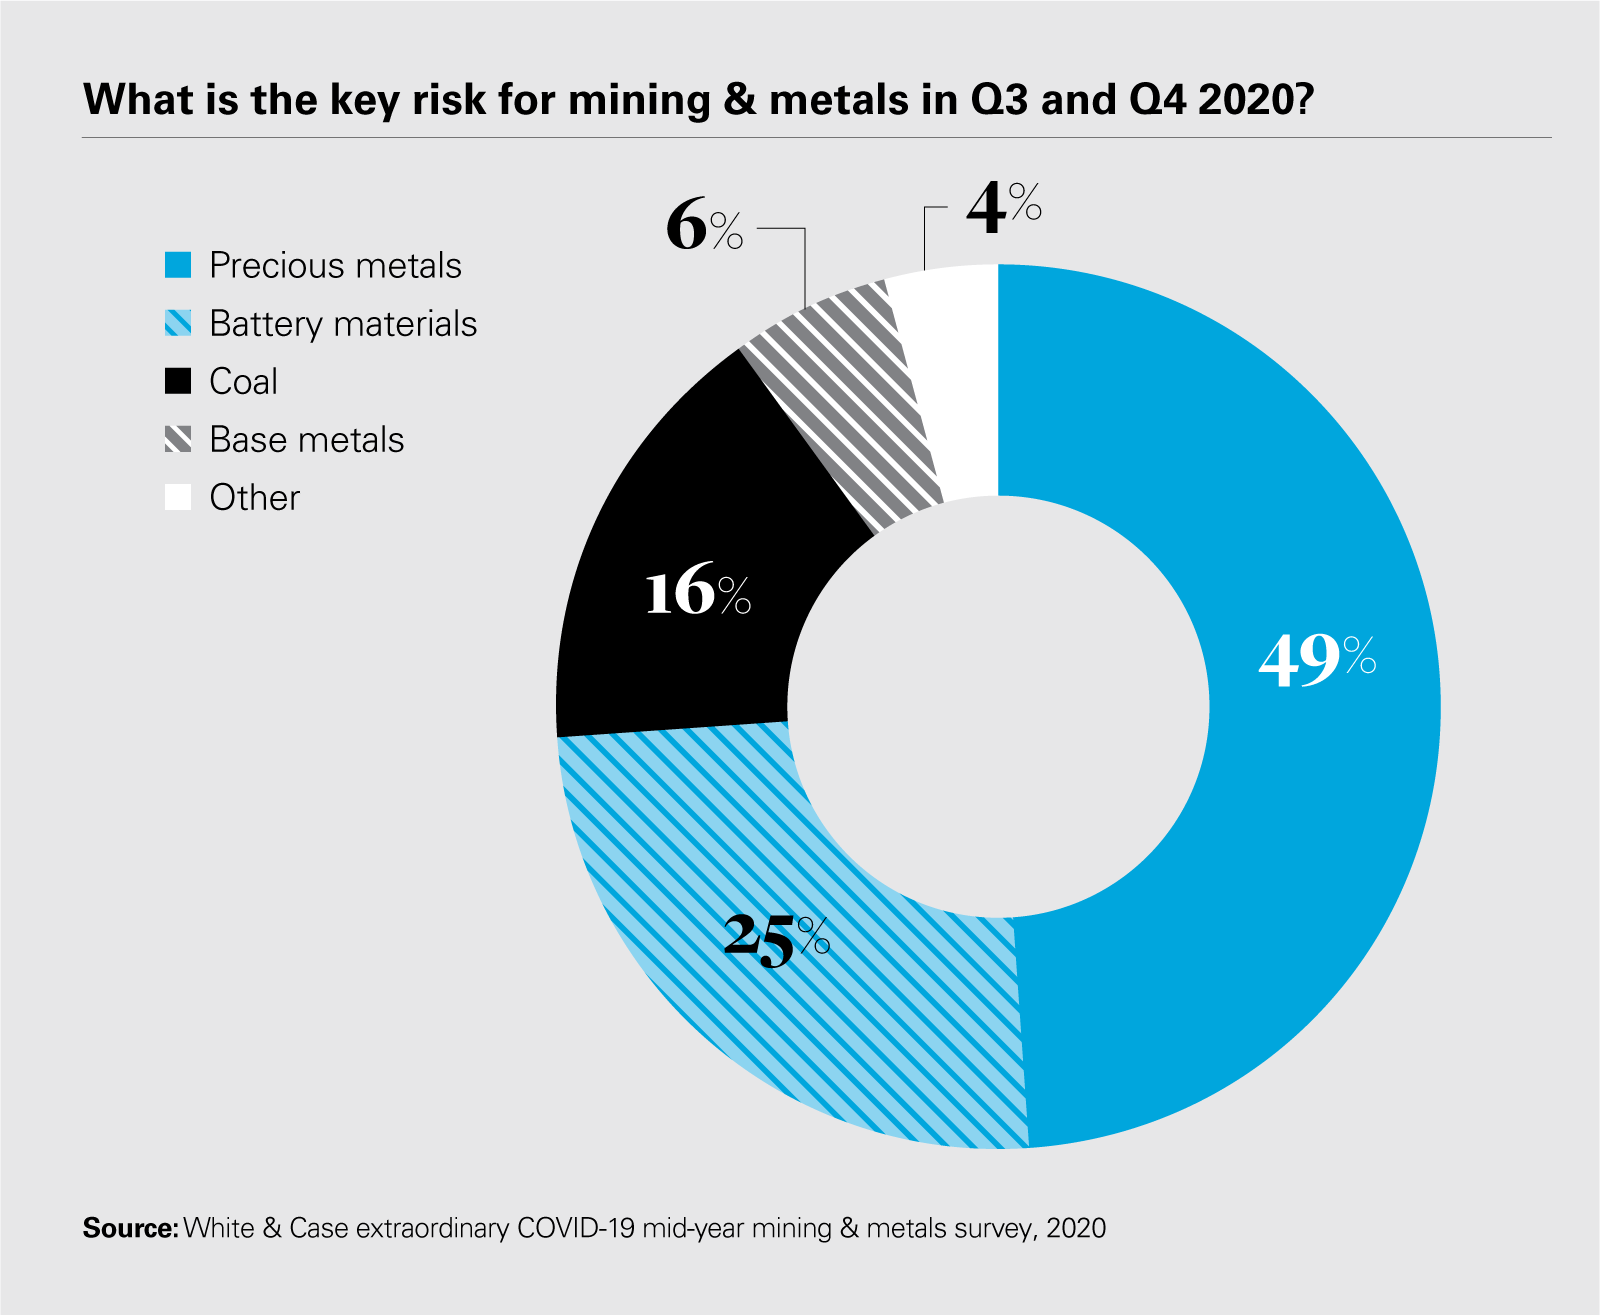 What is the key risk for mining & metals in Q3 and Q4 2020?